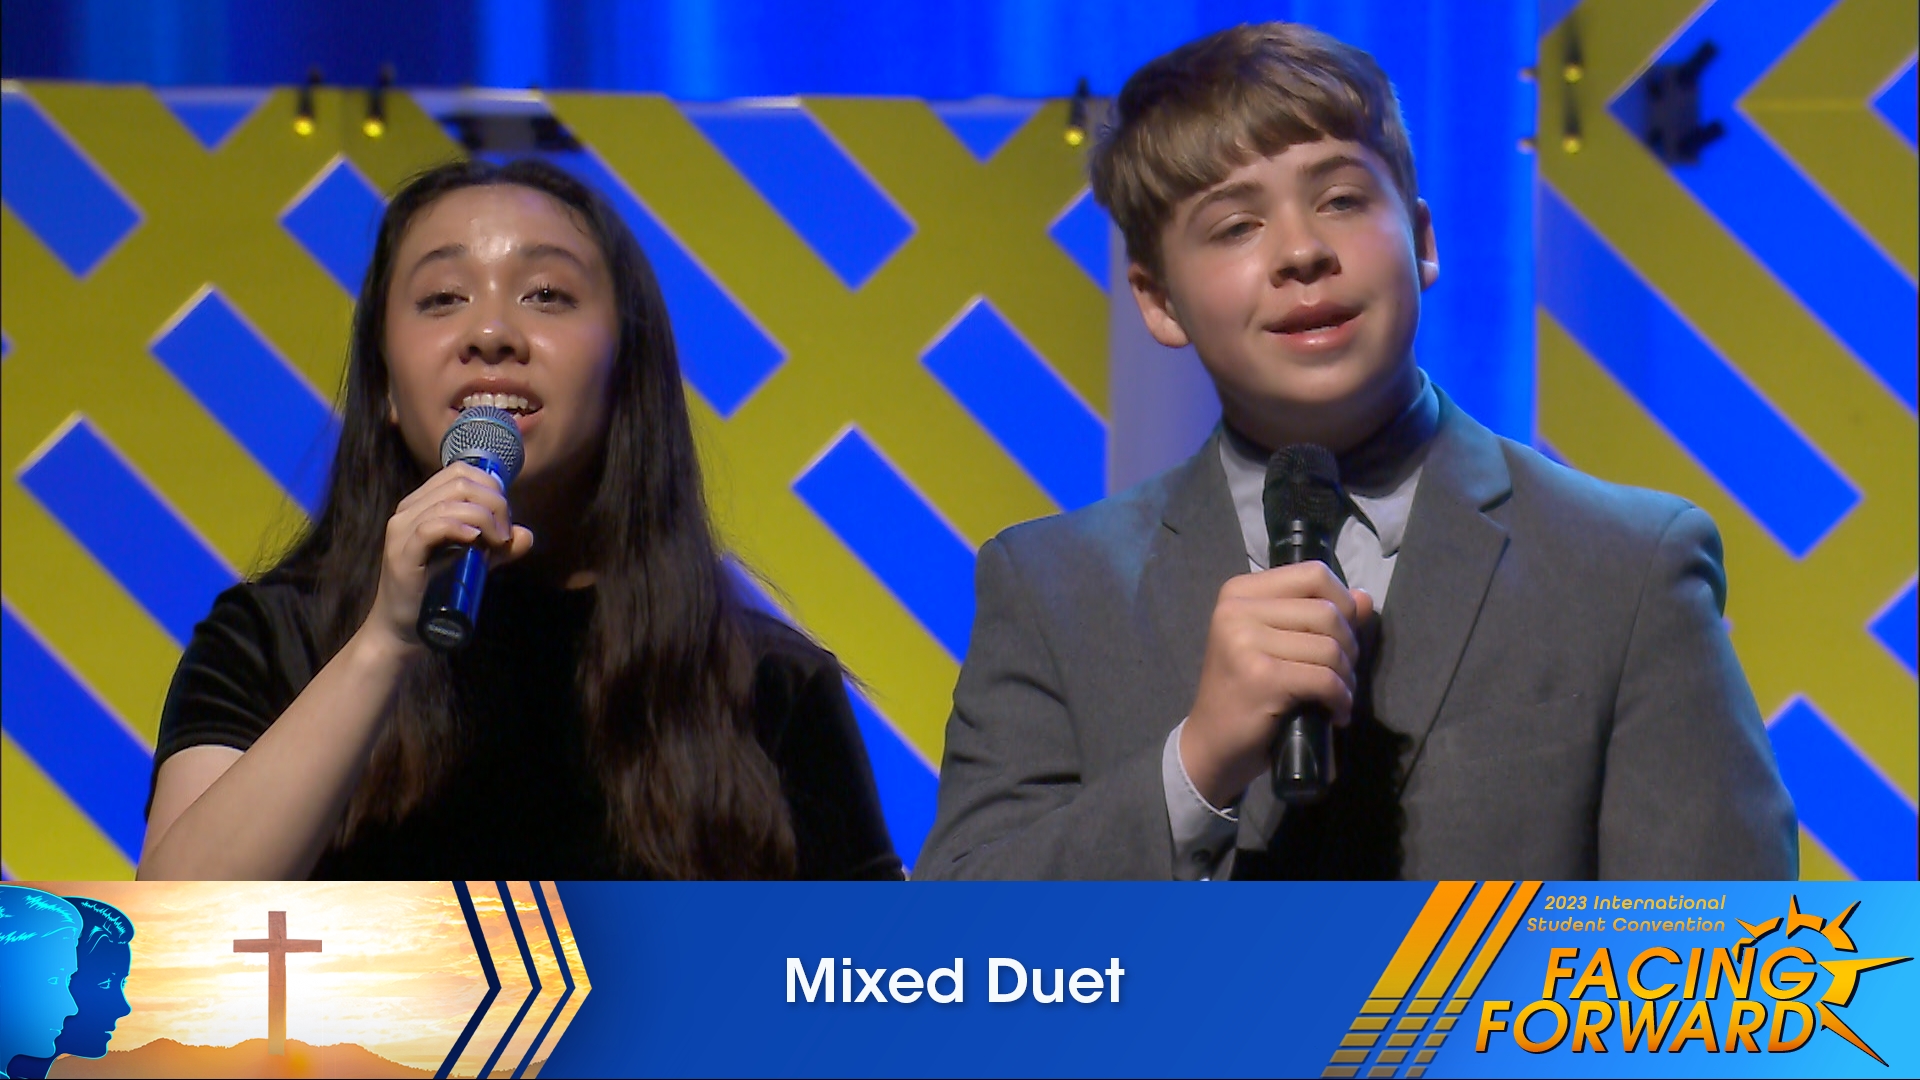 Mixed Duet, "Wherever You Are" - ISC 2023